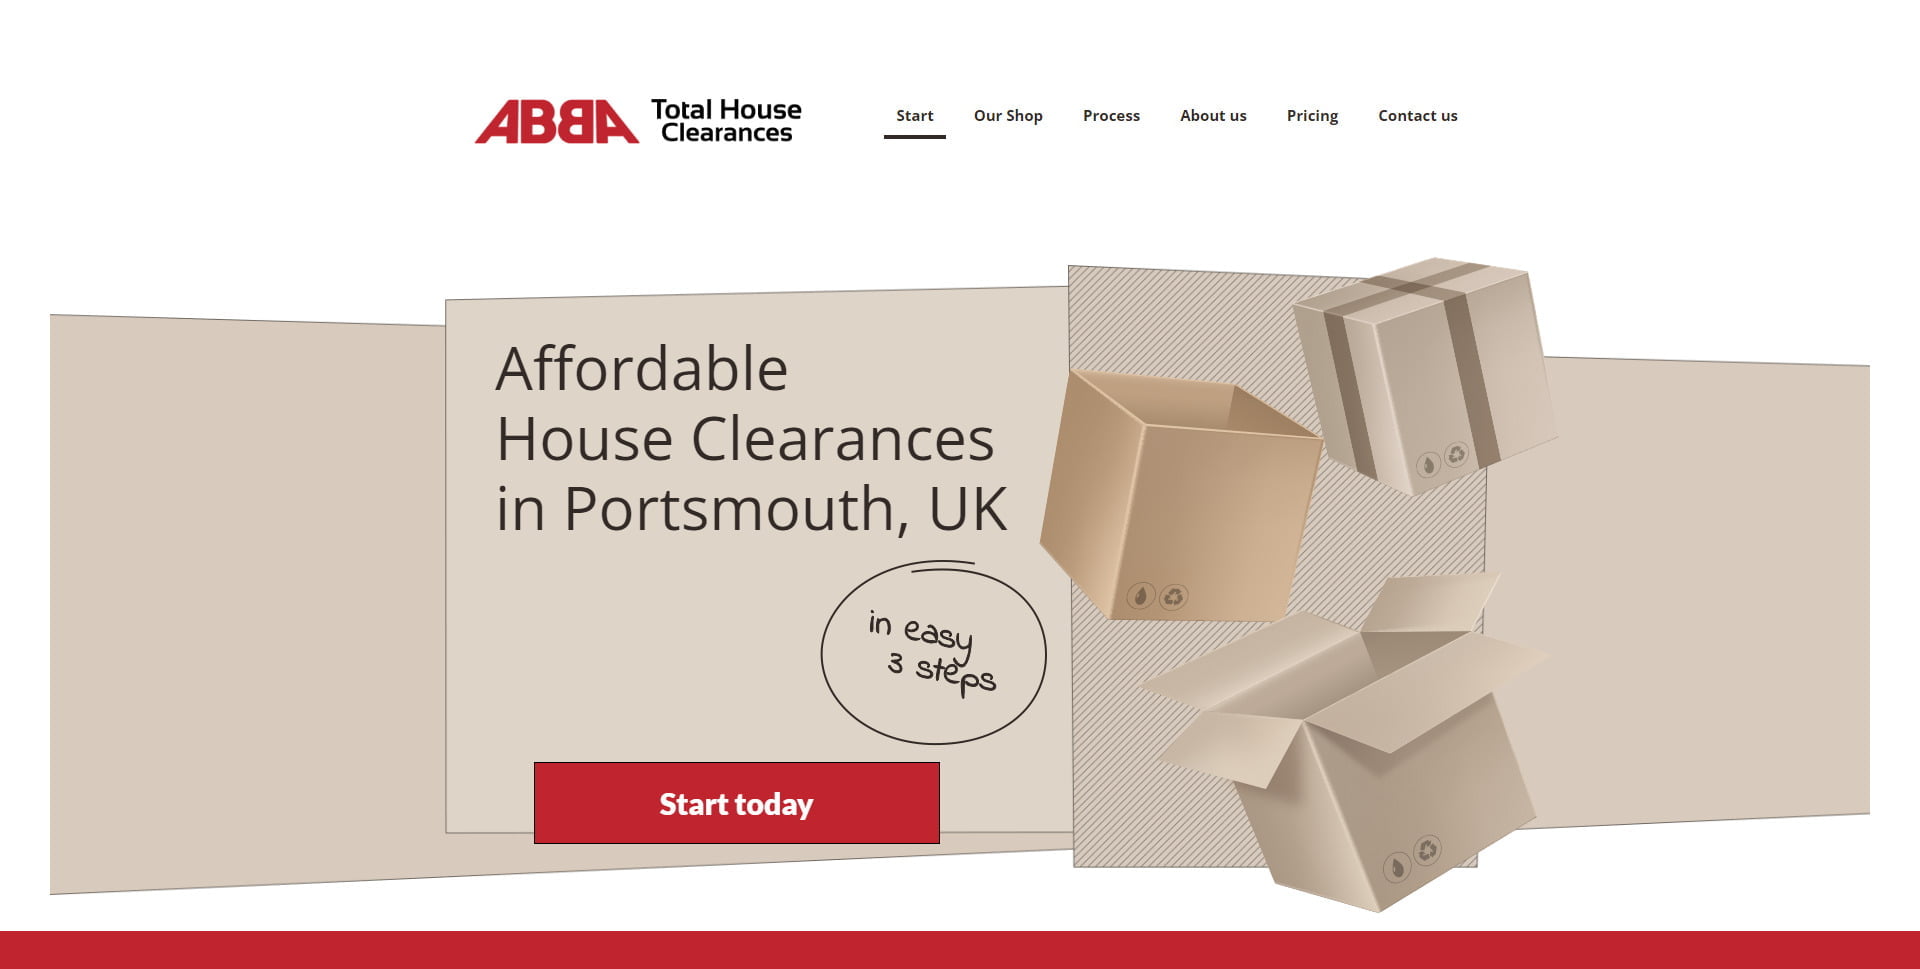 ABBA Total House Clearance Website Design